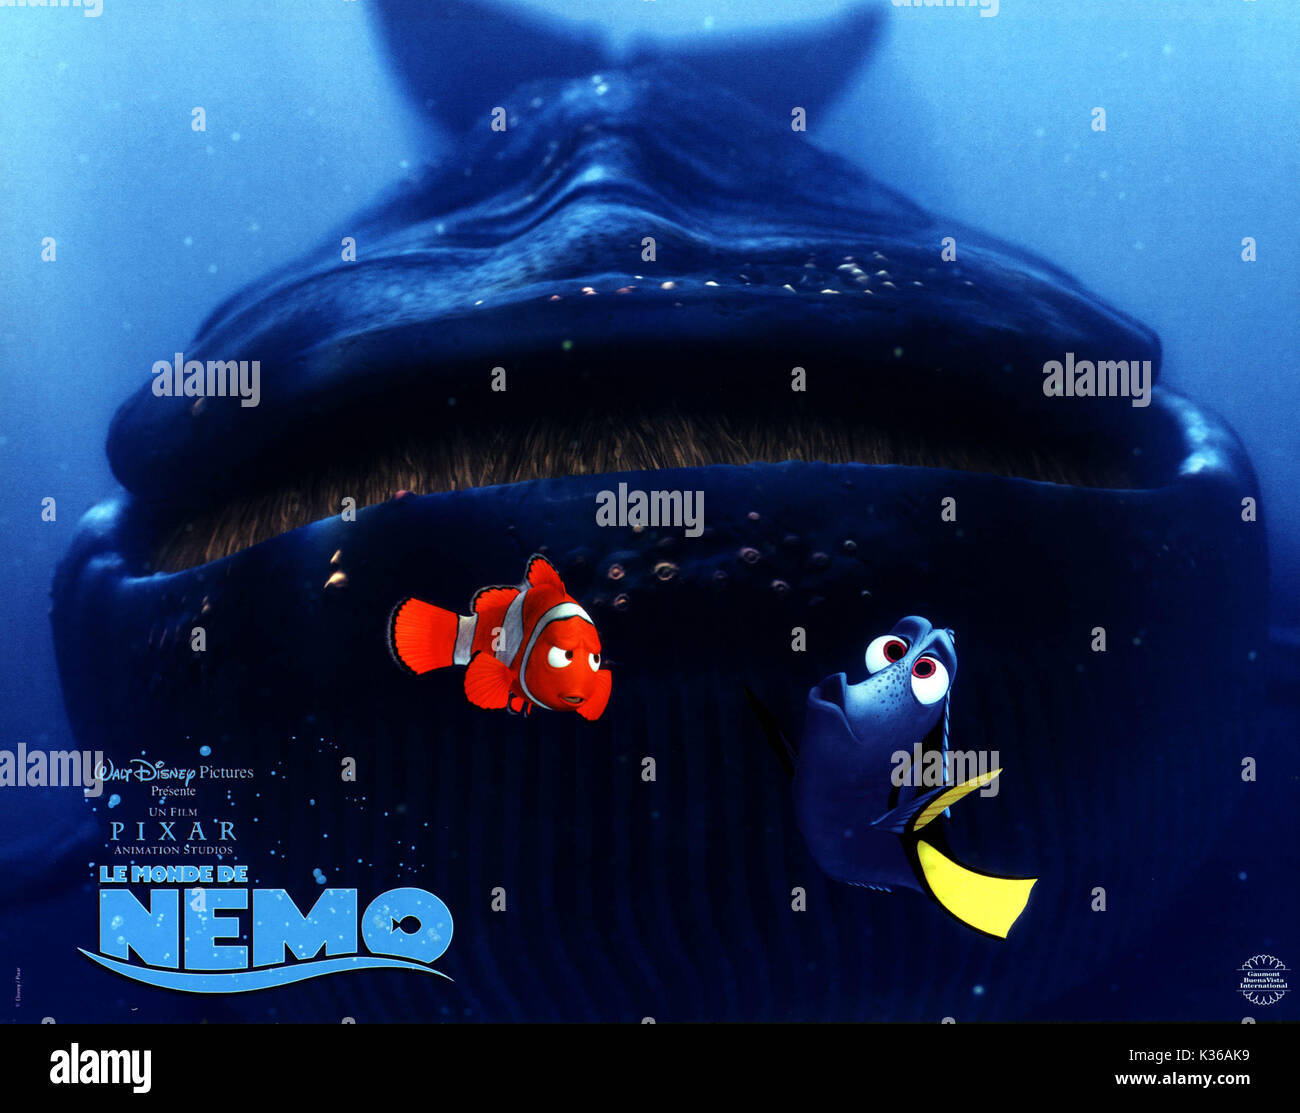 FINDING NEMO MARLIN AND DORY AAND THE WHALE PLEASE CREDIT DISNEY/PIXAR     Date: 2003 Stock Photo